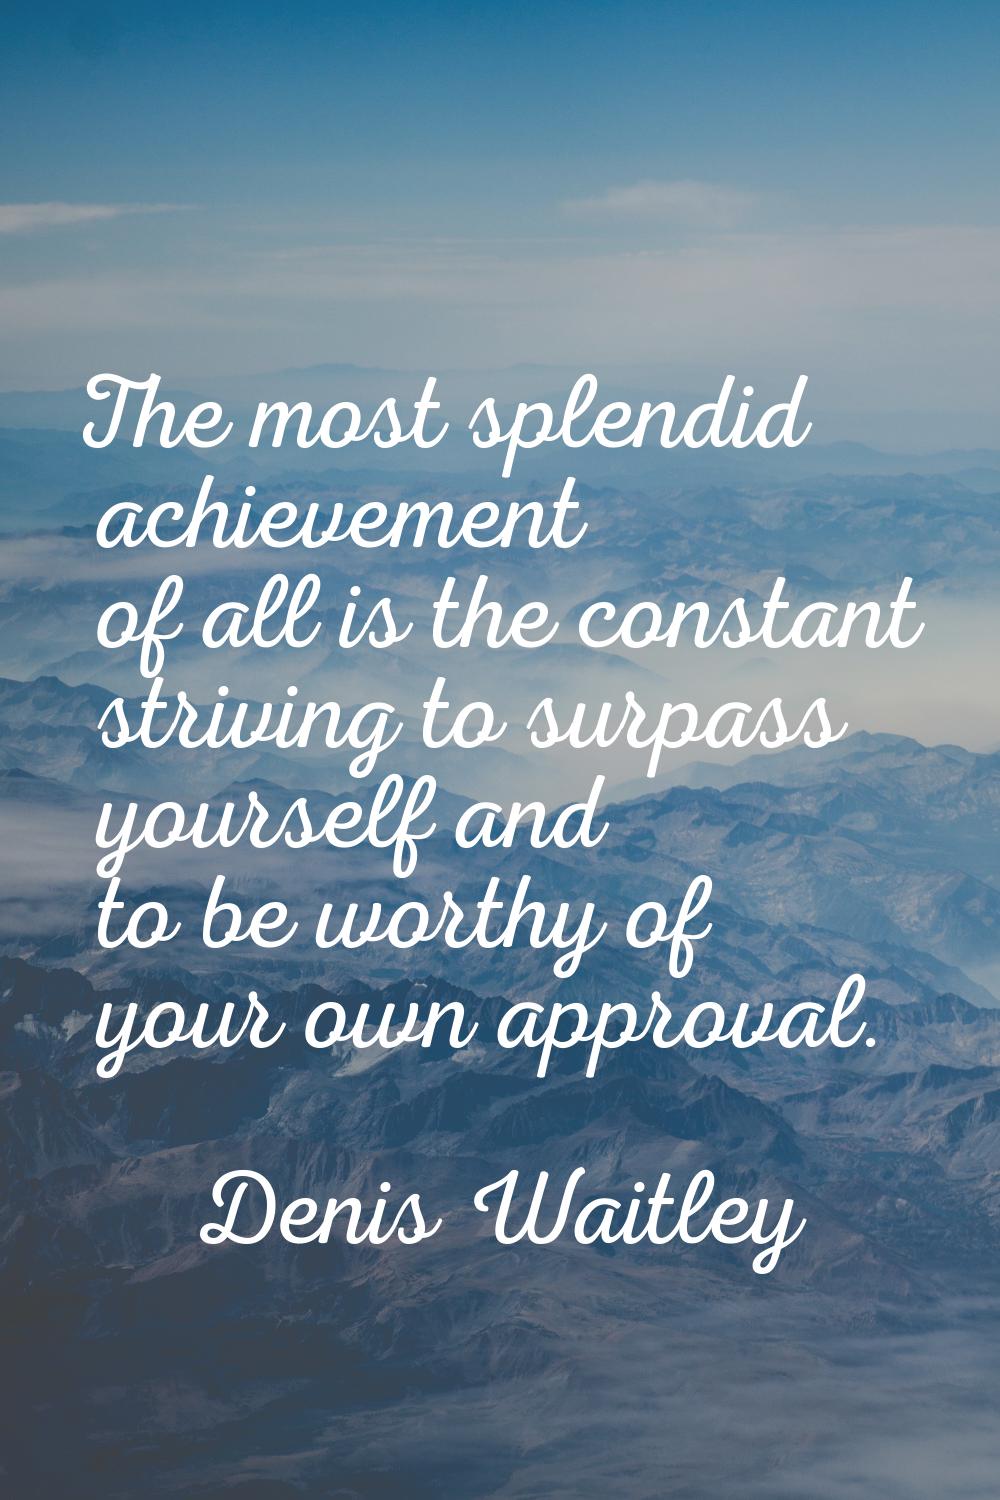 The most splendid achievement of all is the constant striving to surpass yourself and to be worthy 